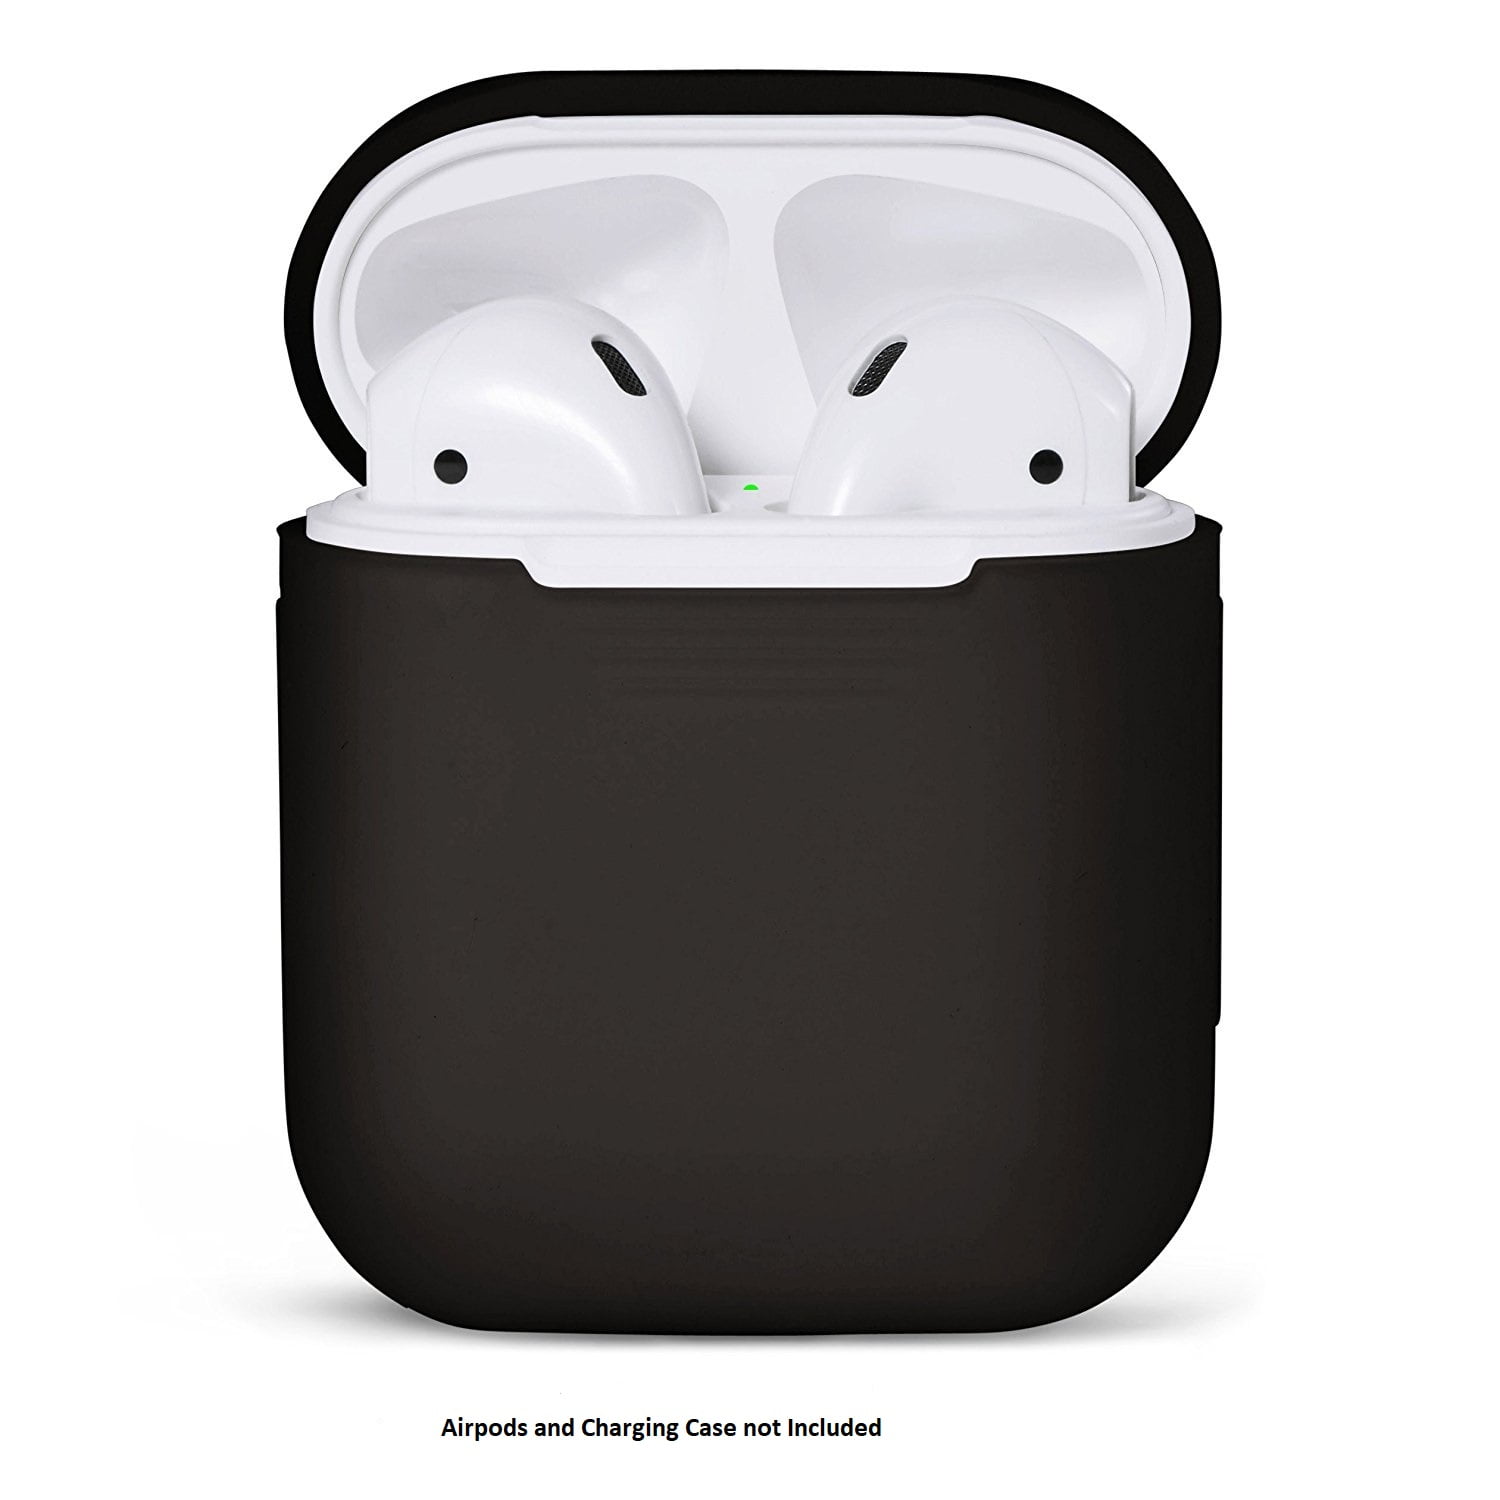 AirPods Silicone Case Cover Protective Skin for Apple Airpod Charging Case